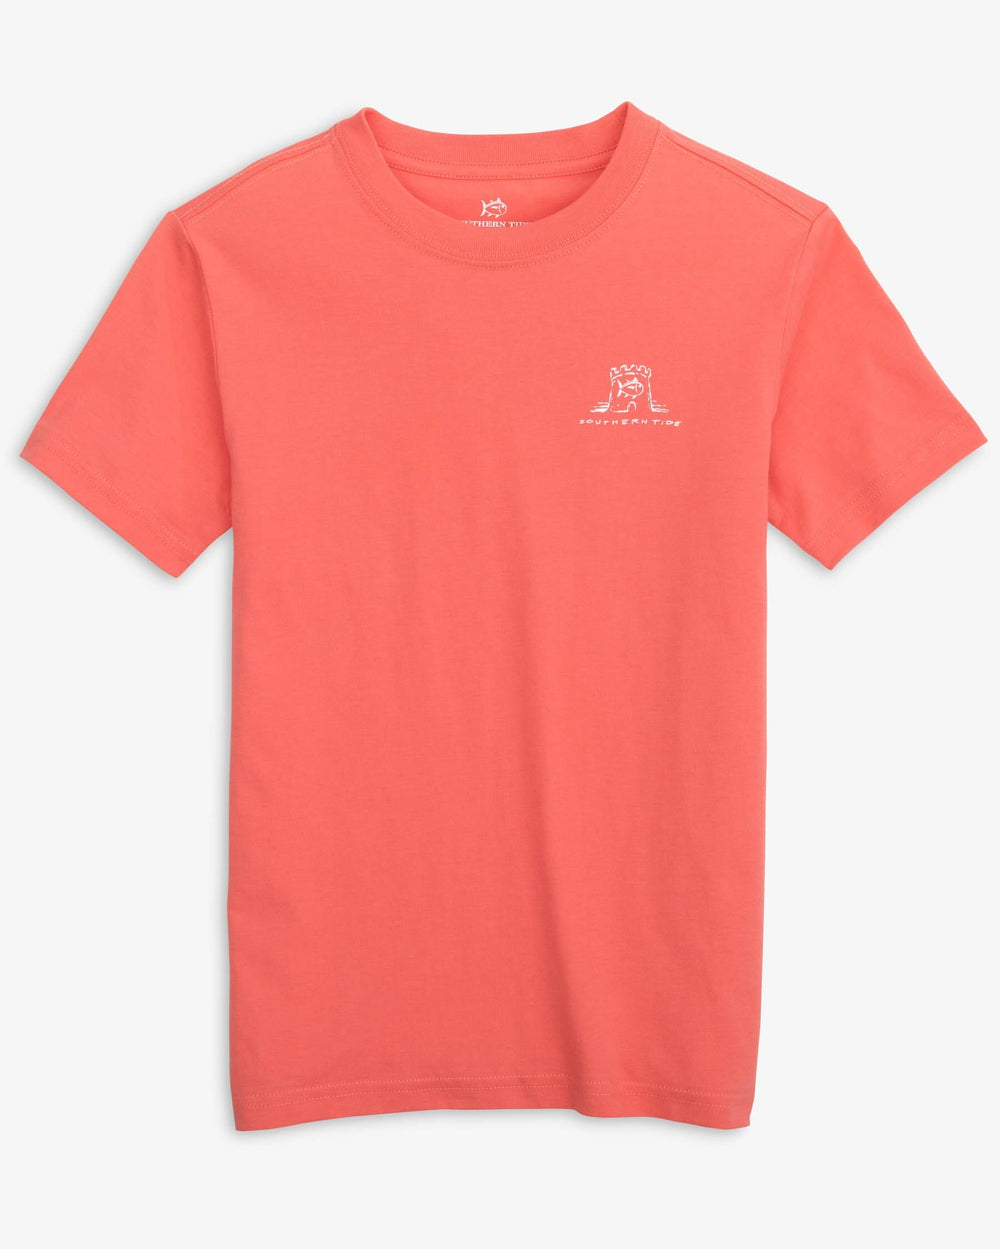 The front view of the Southern Tide Kids Beachside Castle T-shirt by Southern Tide - Rosewood Red